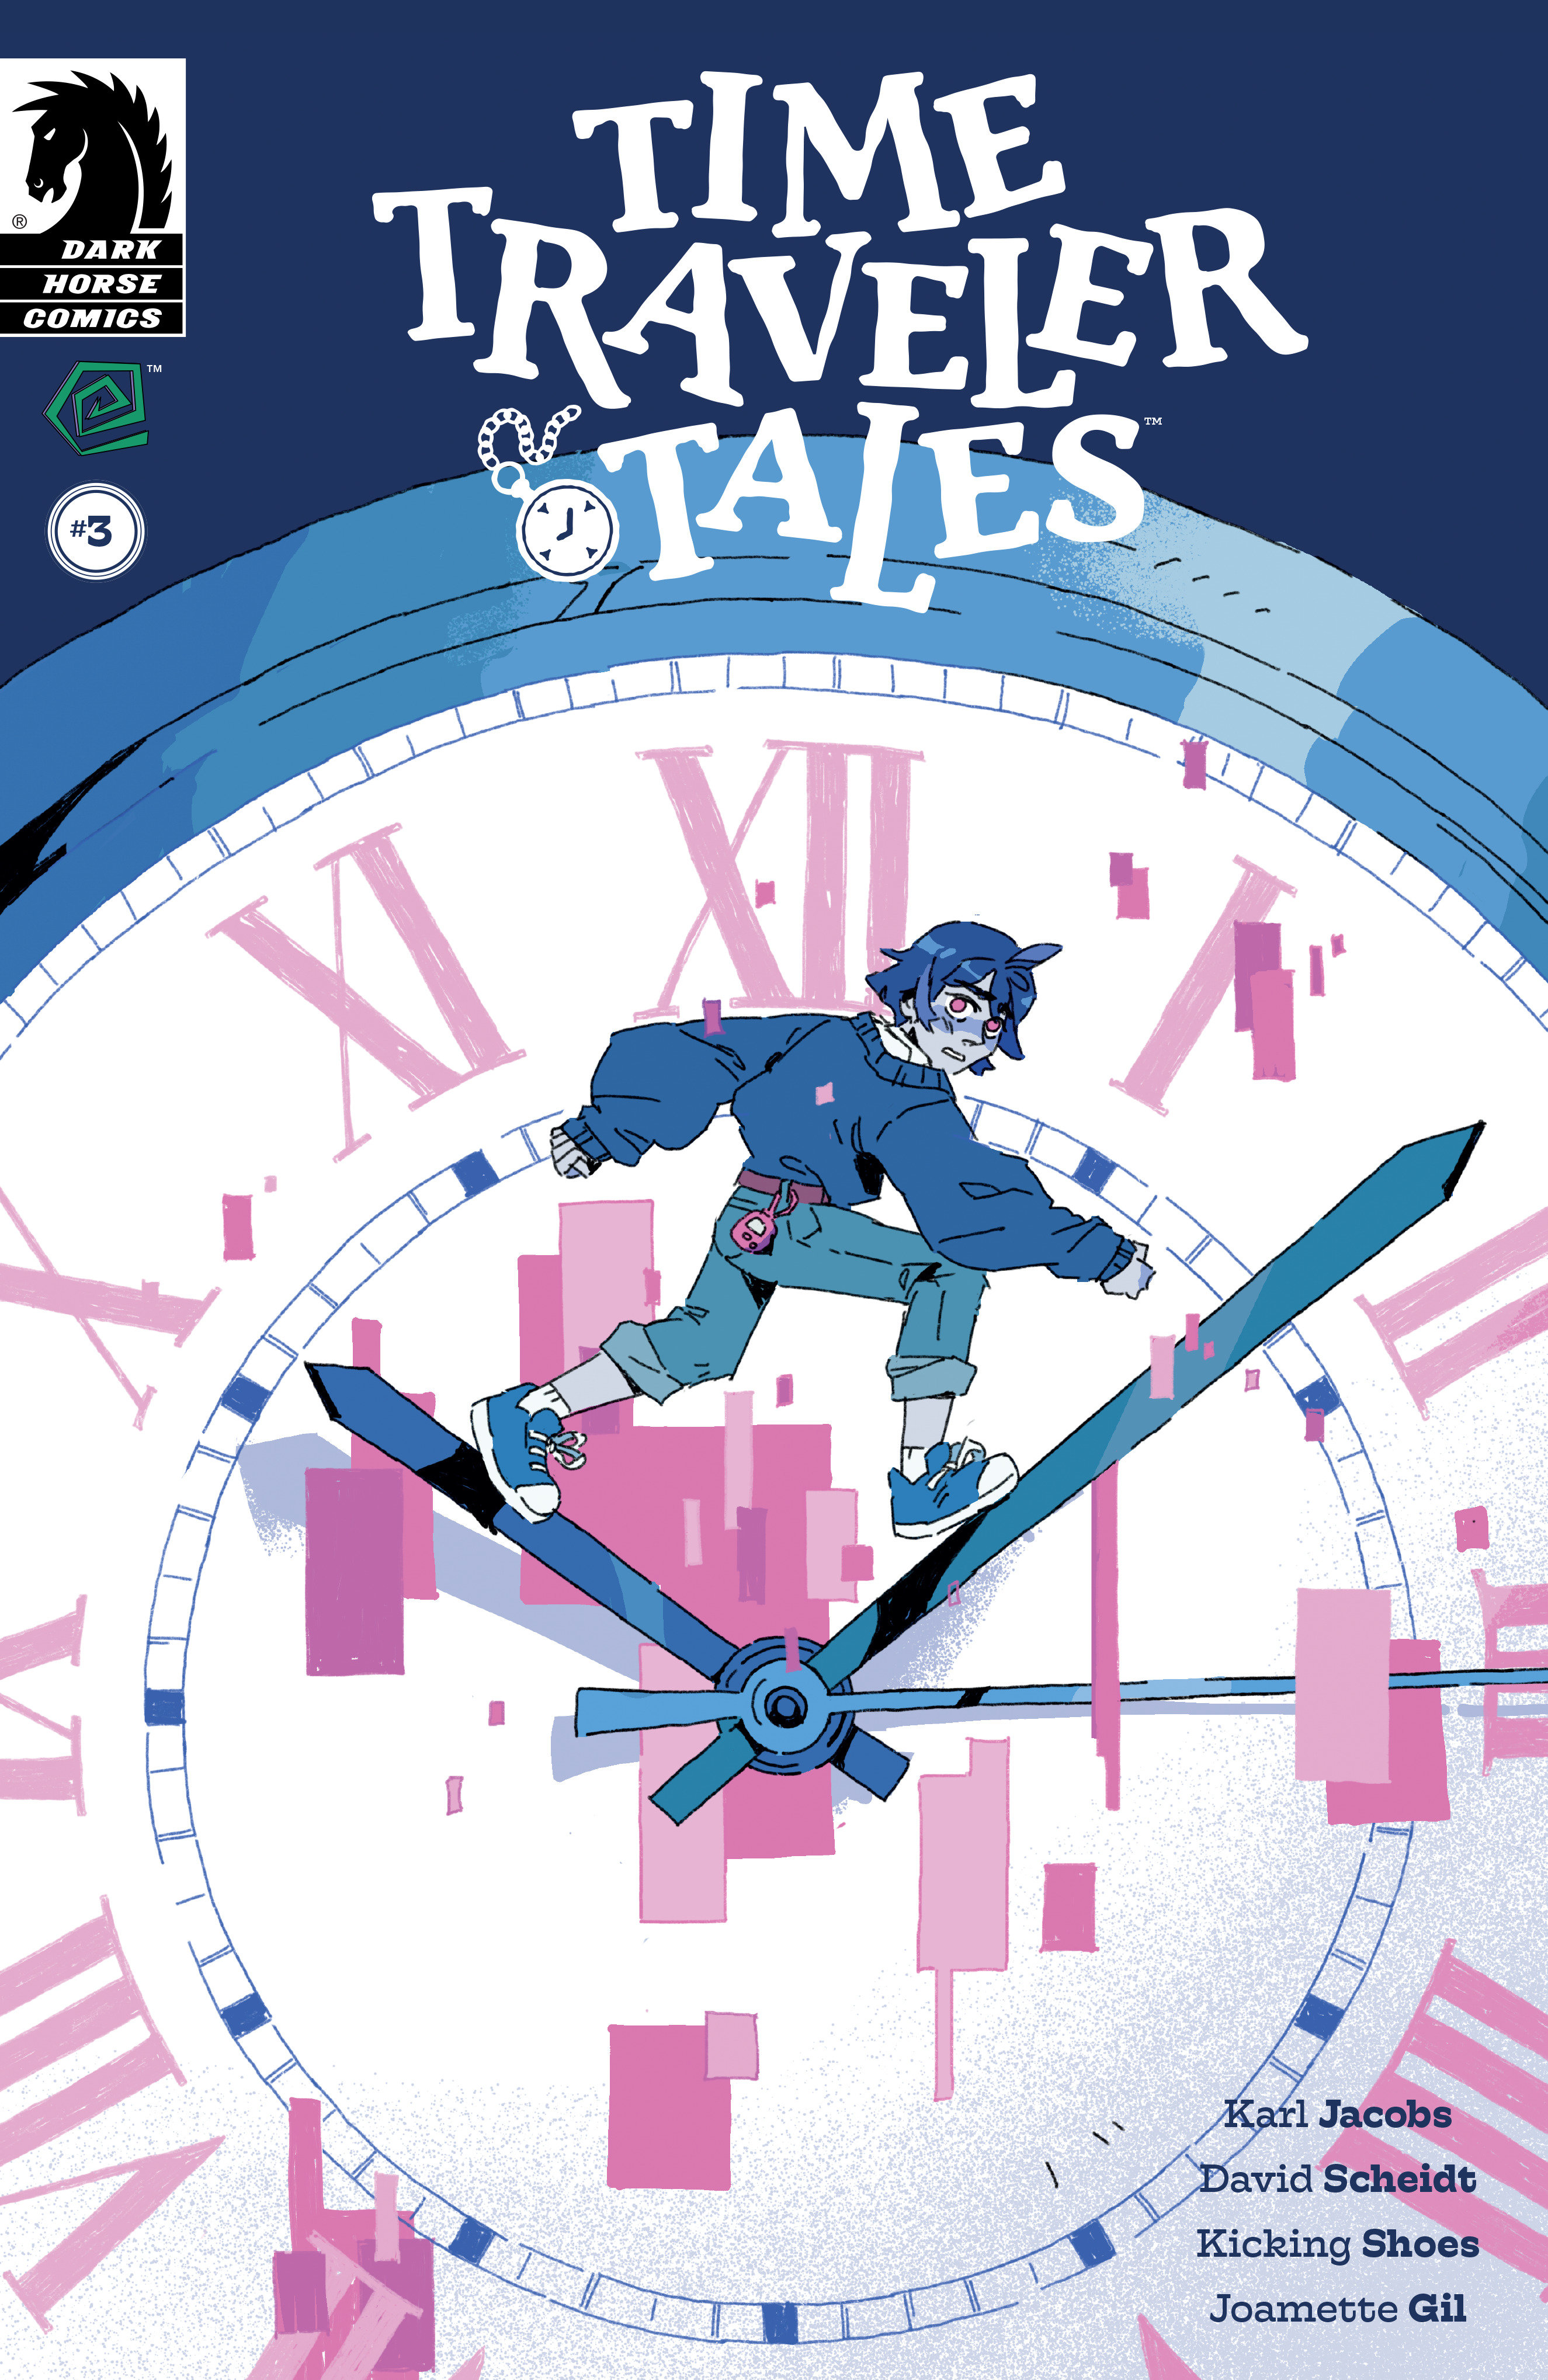 Time Traveler Tales #3 Cover A (Kate Sheridan)